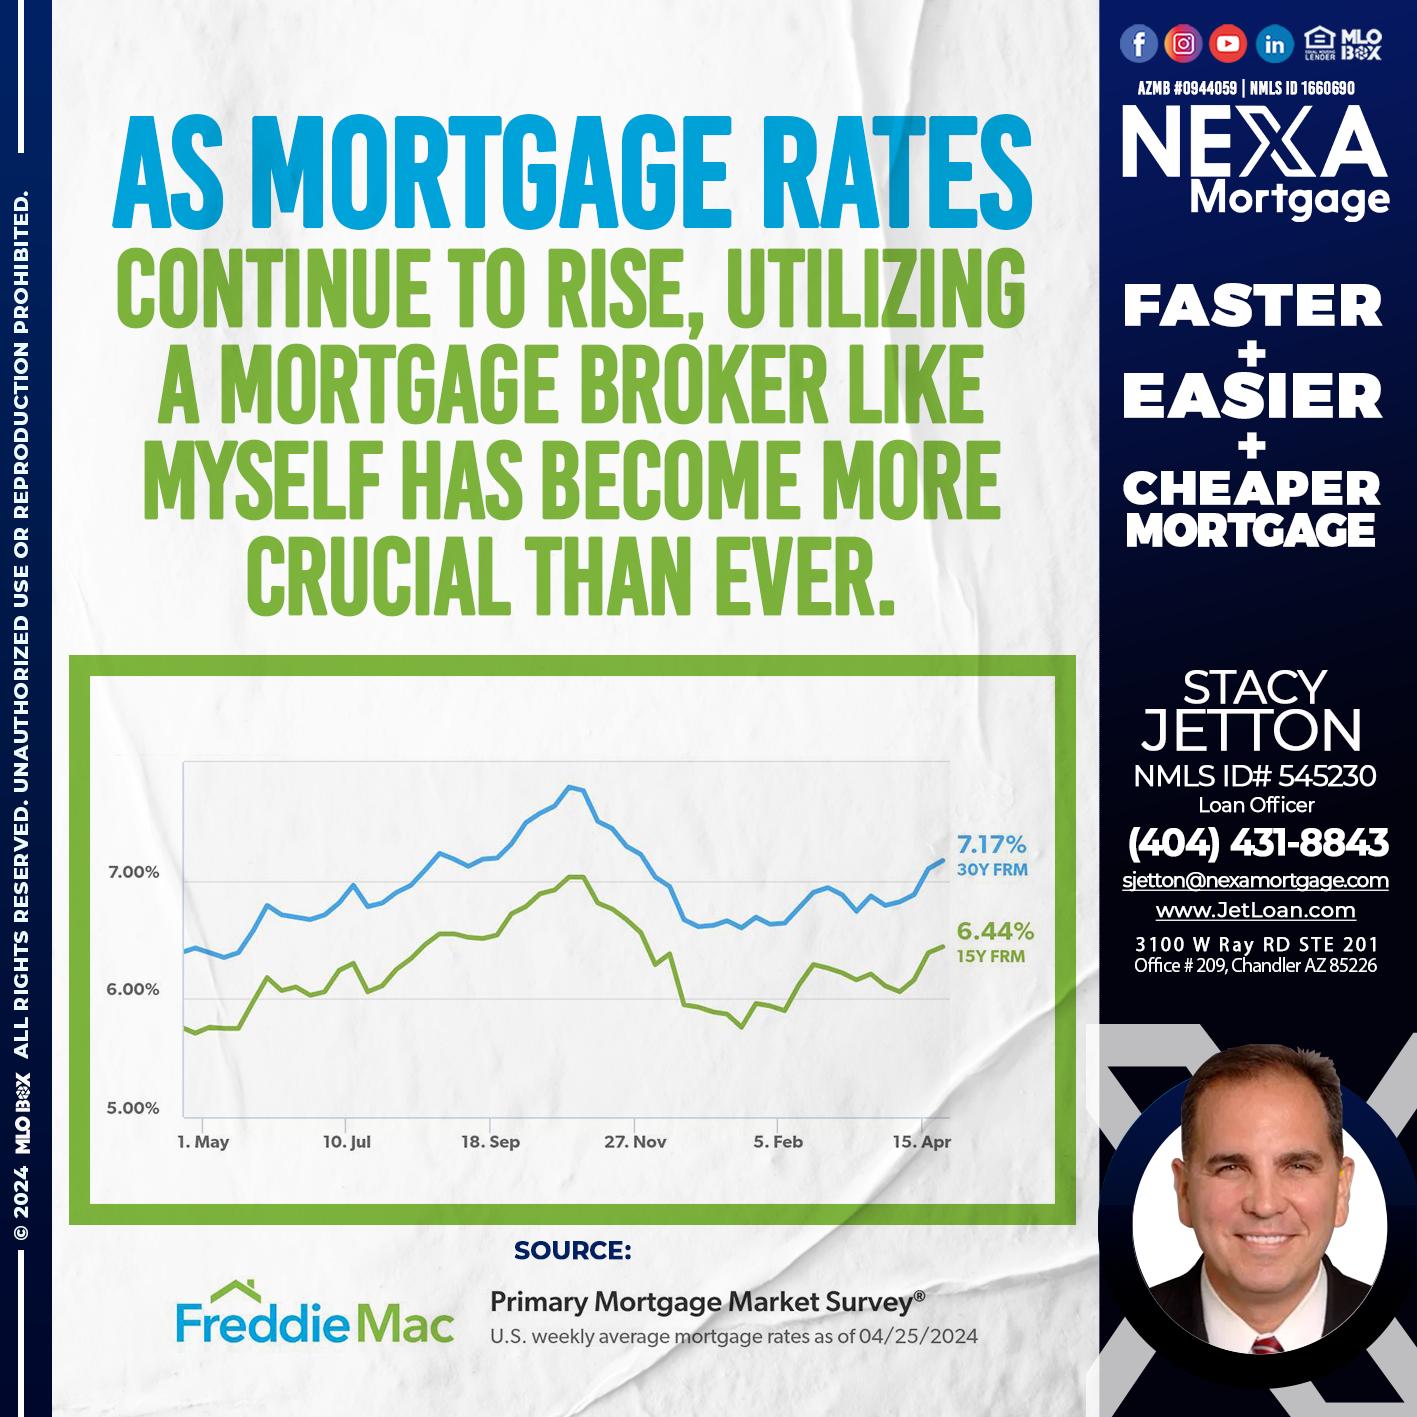 WHY AXEN - Stacy Jetton -Sr. Mortgage Broker